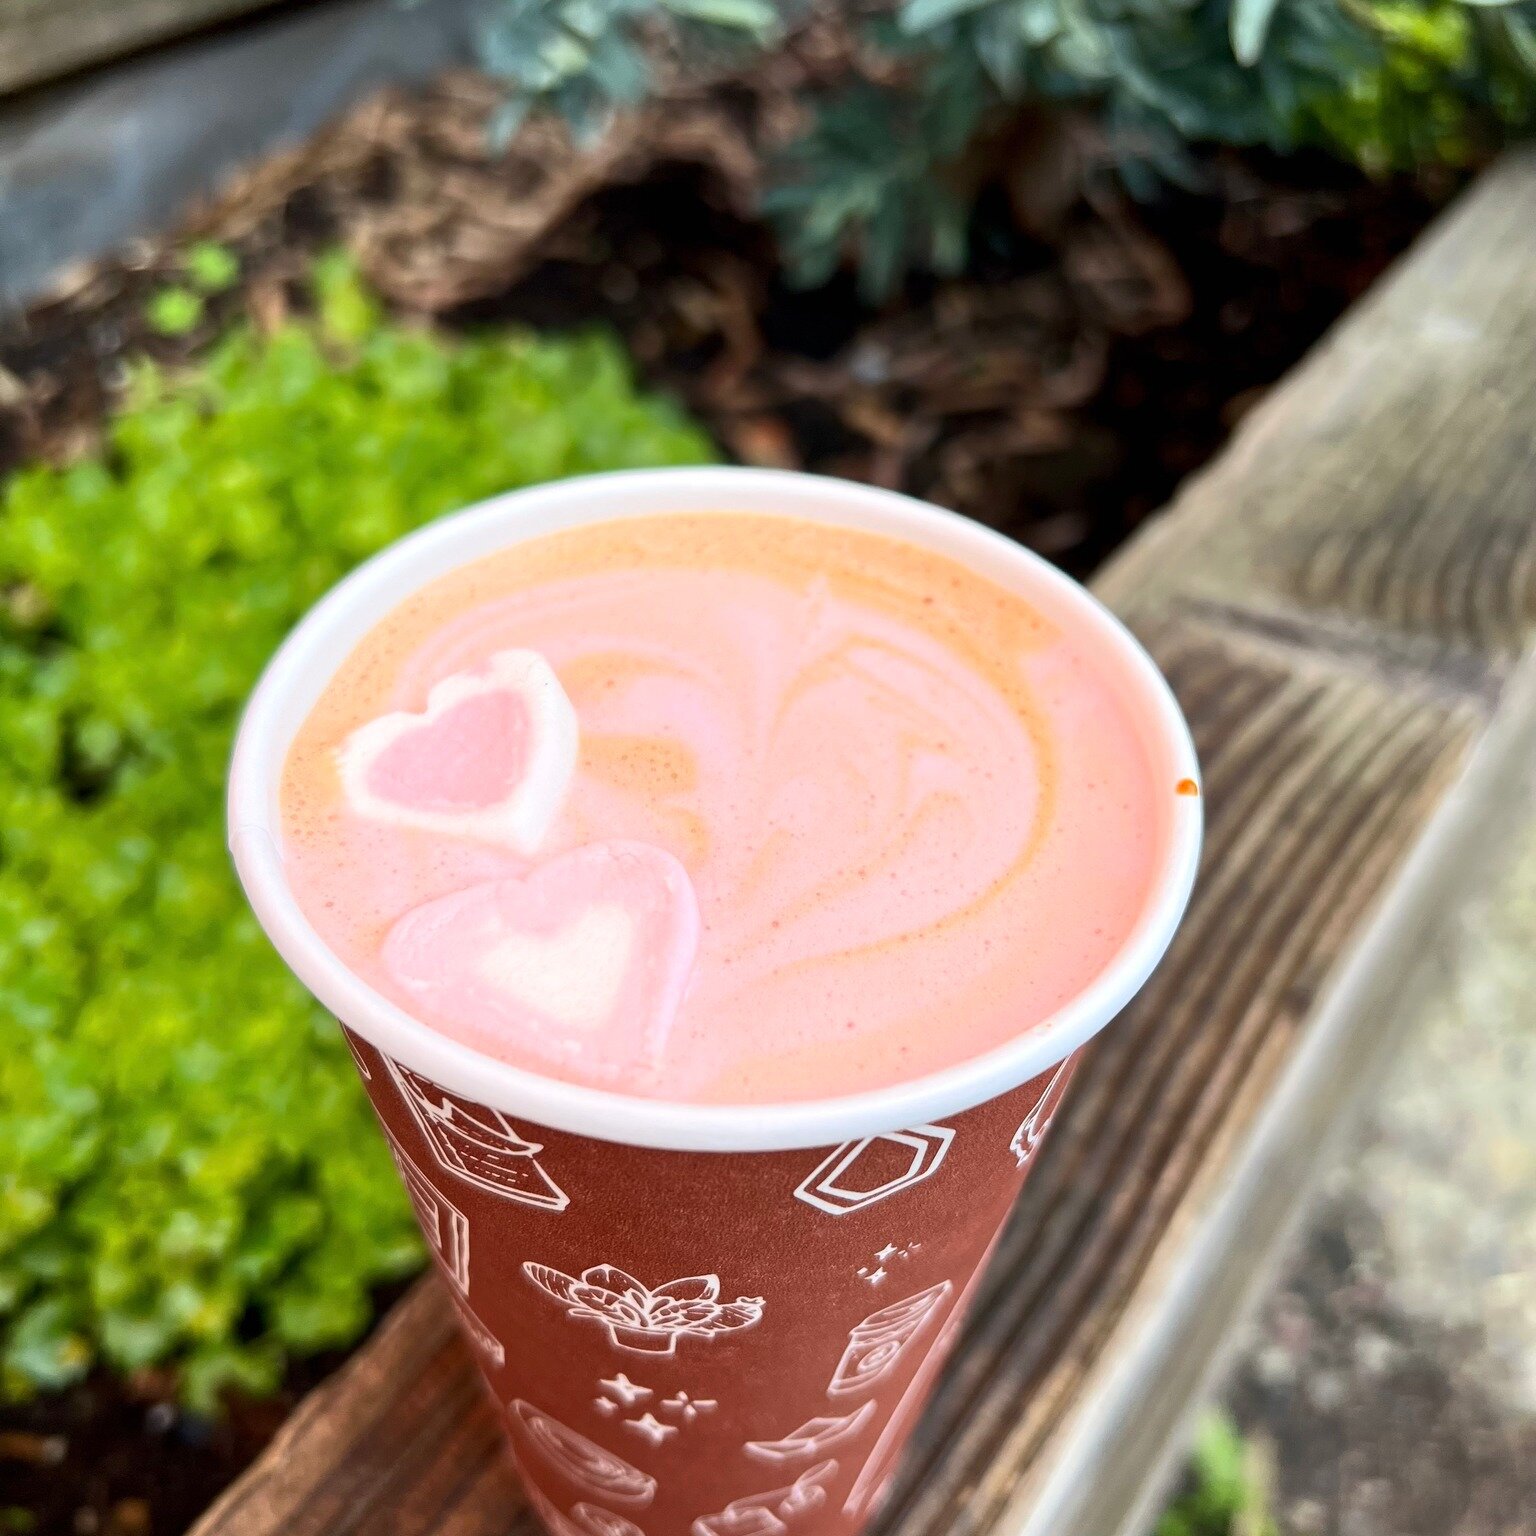 My heart BEETS for you! 
Lovers Latte available this month- white mocha infused with beet powder and topped with heart marshmallow. Buy one get one on Valentines Day!!
#theabbeysc #valentinesday